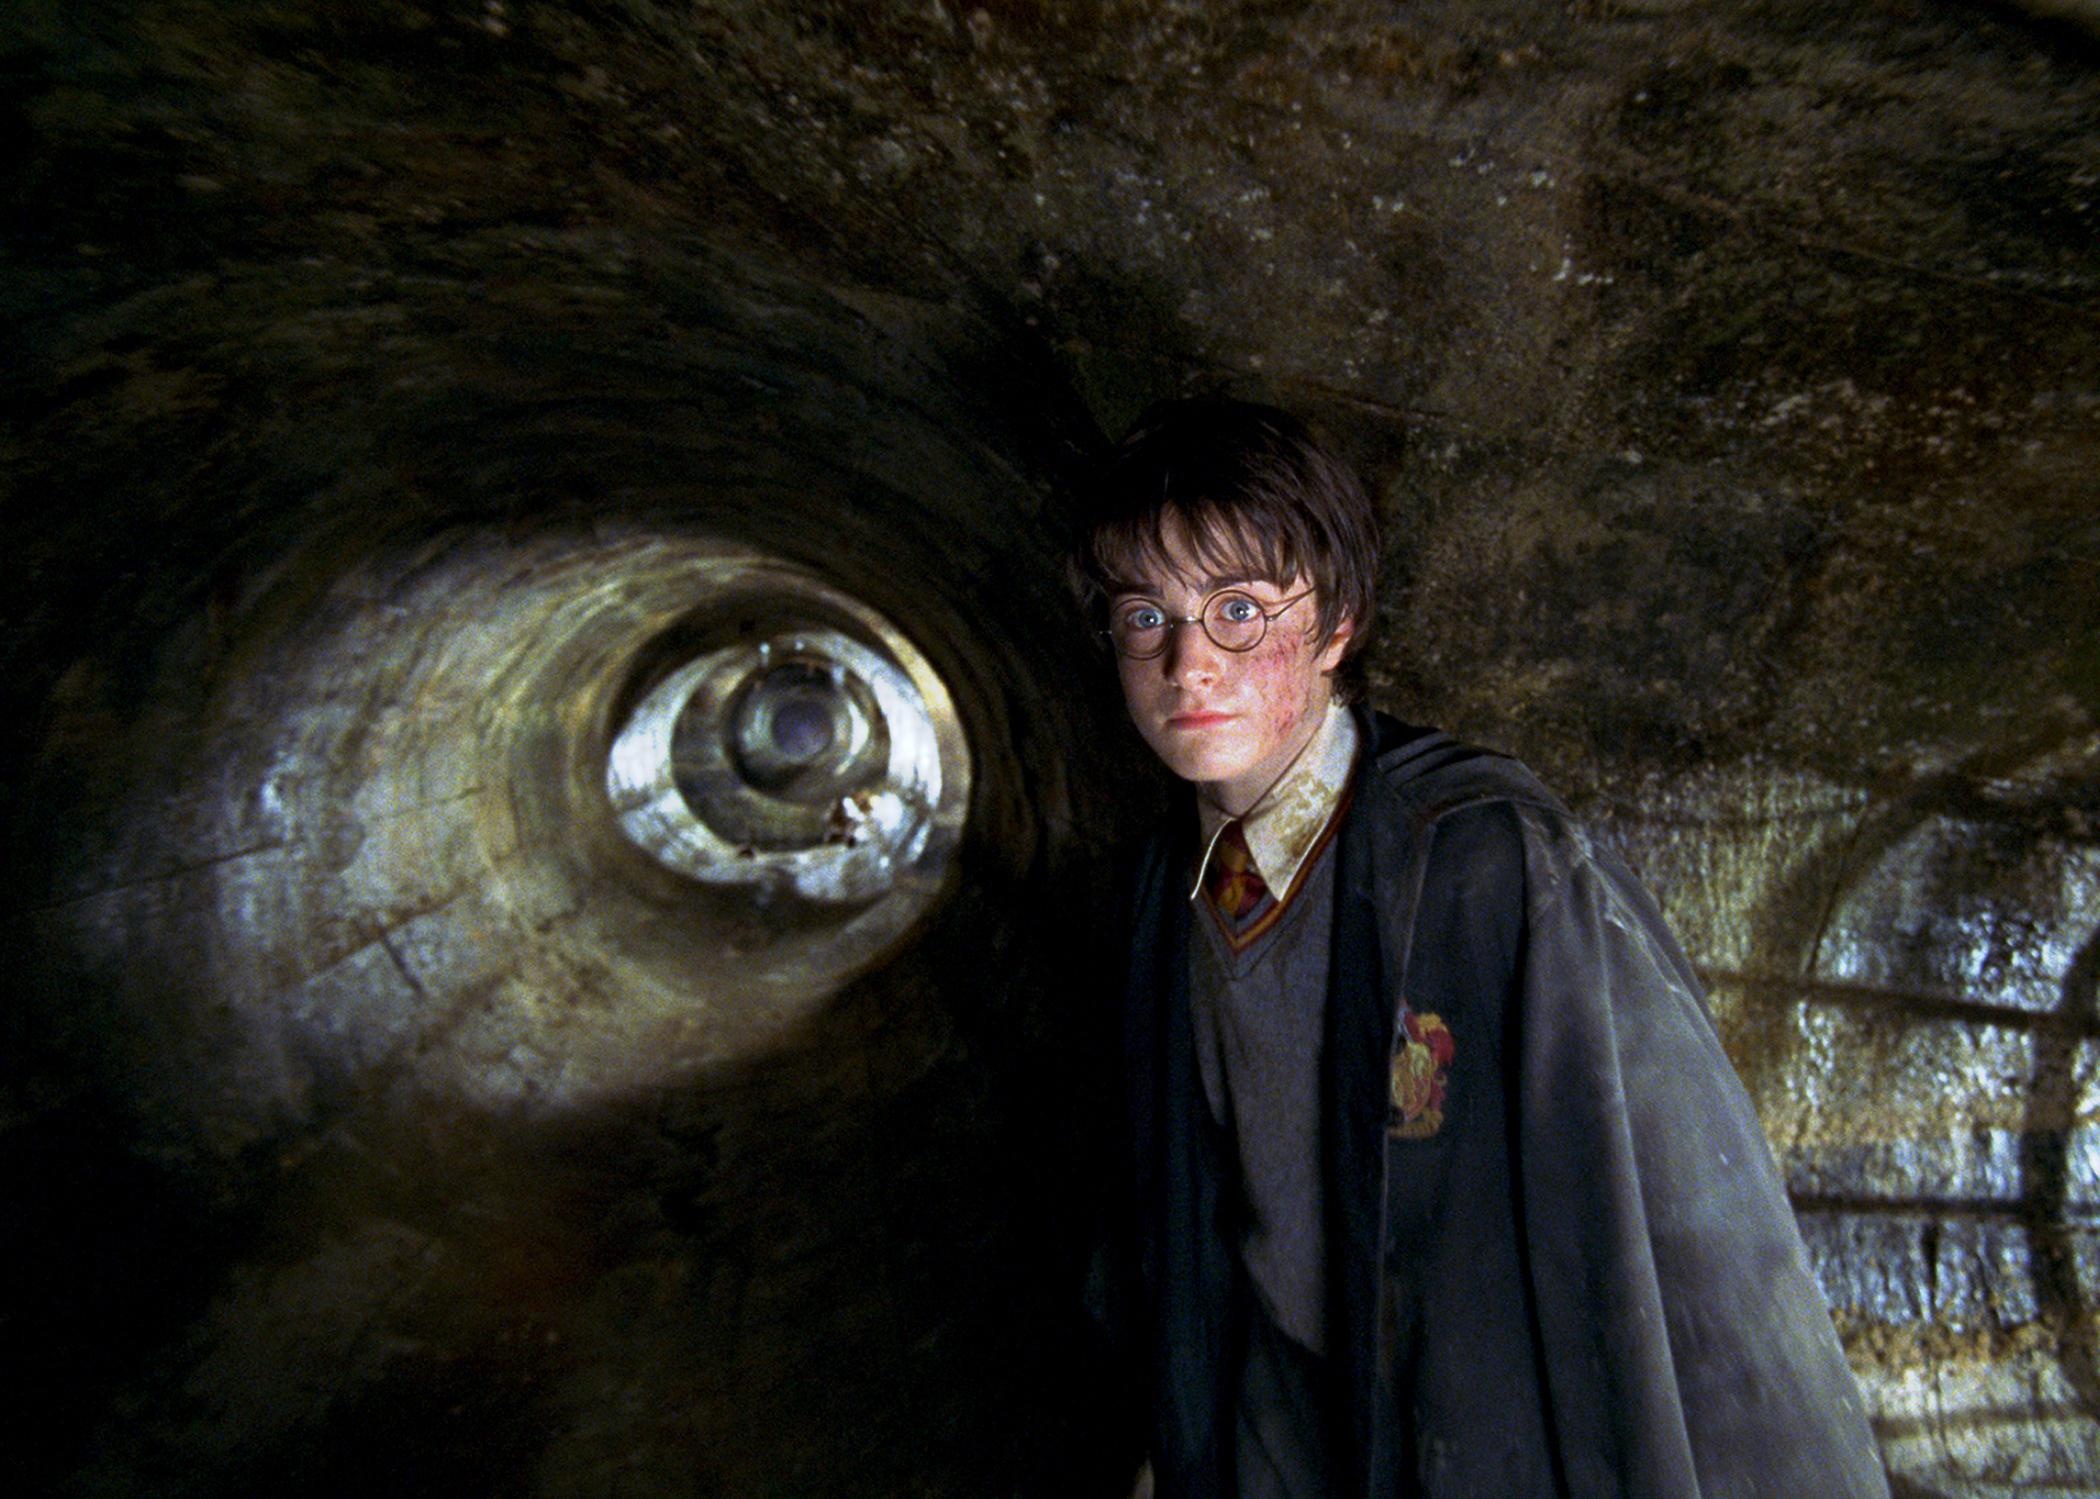 Chamber of Secrets, HD wallpapers, Background images, 2100x1500 HD Desktop